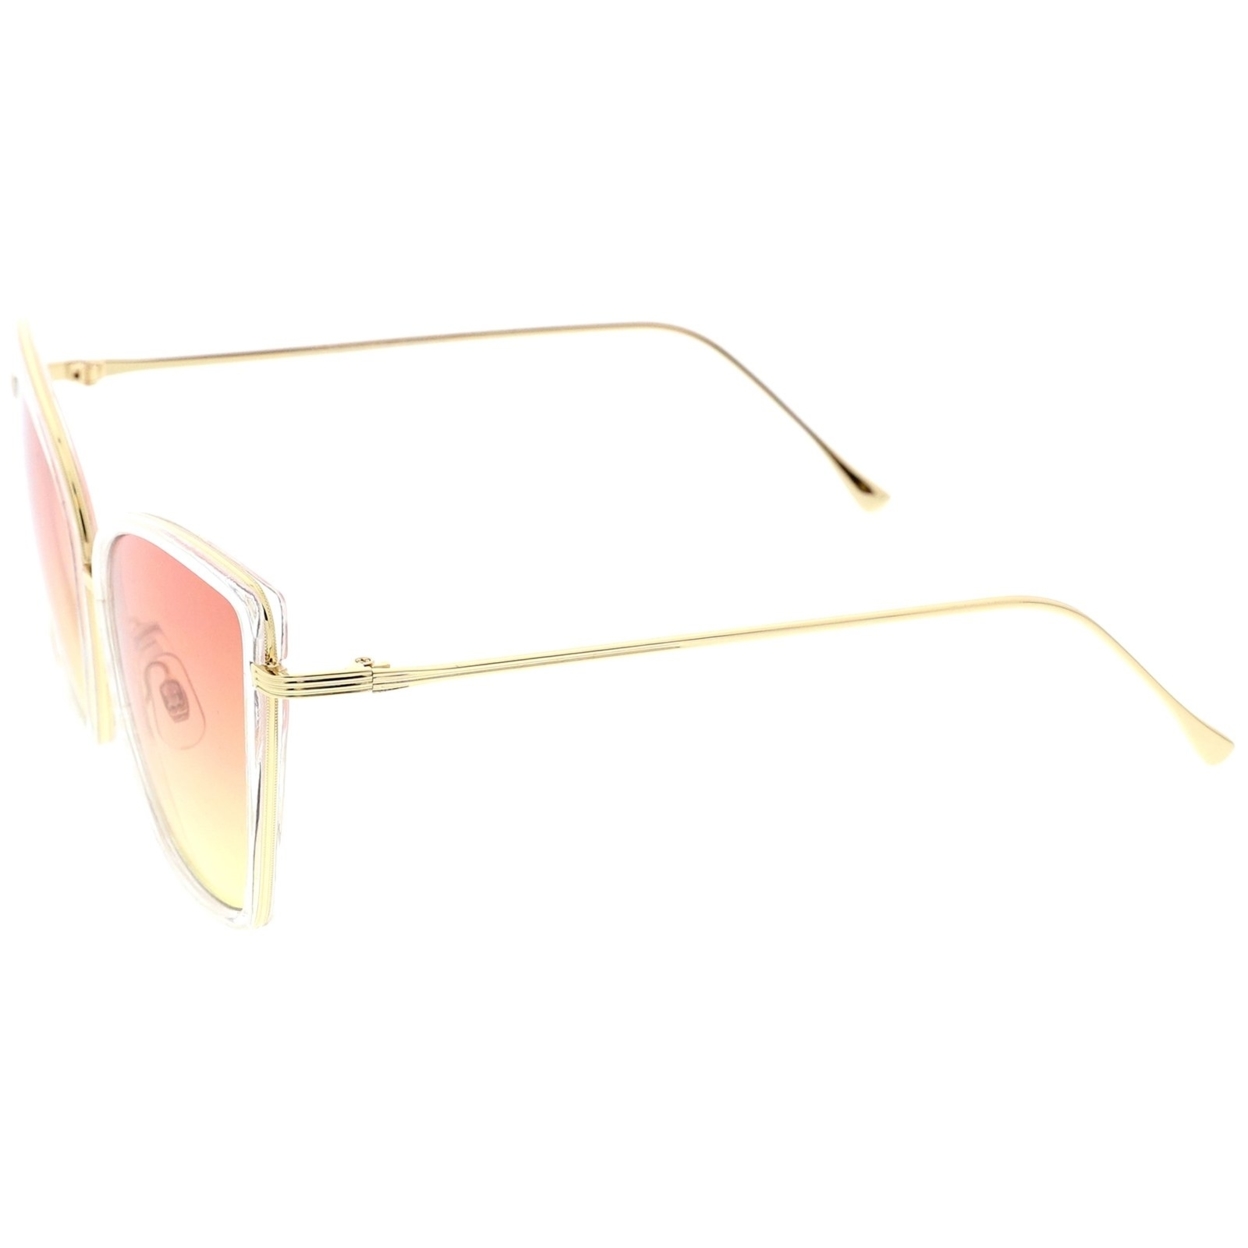 Women's Oversize Cat Eye Sunglasses With Slim Arms Colored Gradient Lens 56mm - Pink Gold / Orange Gradient